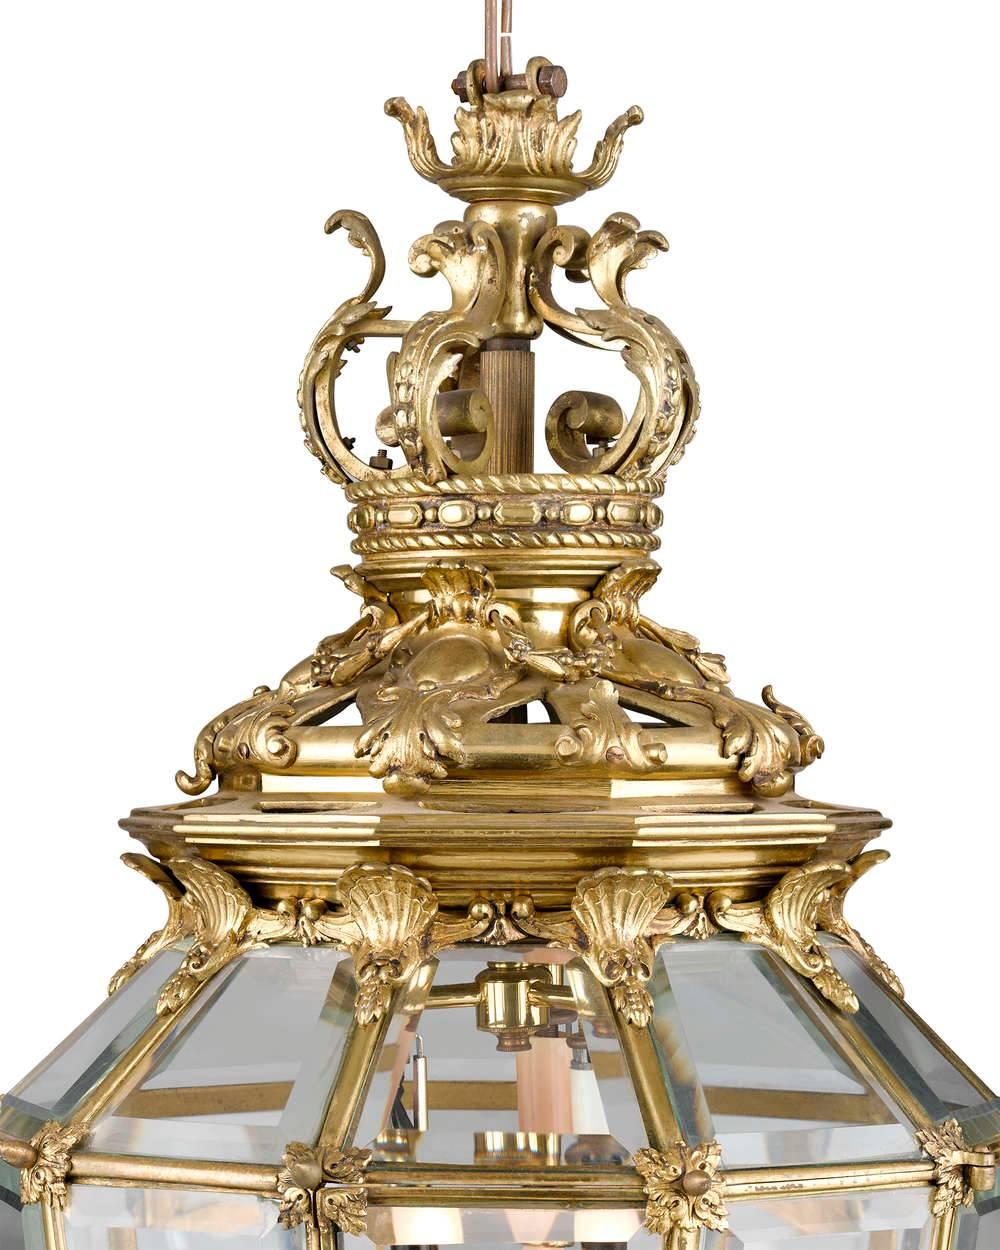 This grand doré bronze hall lantern was inspired by the model made for the Palace of Versailles. The expertly cast bronze is enveloped in beautiful gold gilt, highlighting the Louis XV motif rich in shells and acanthus elements. Beveled glass panels